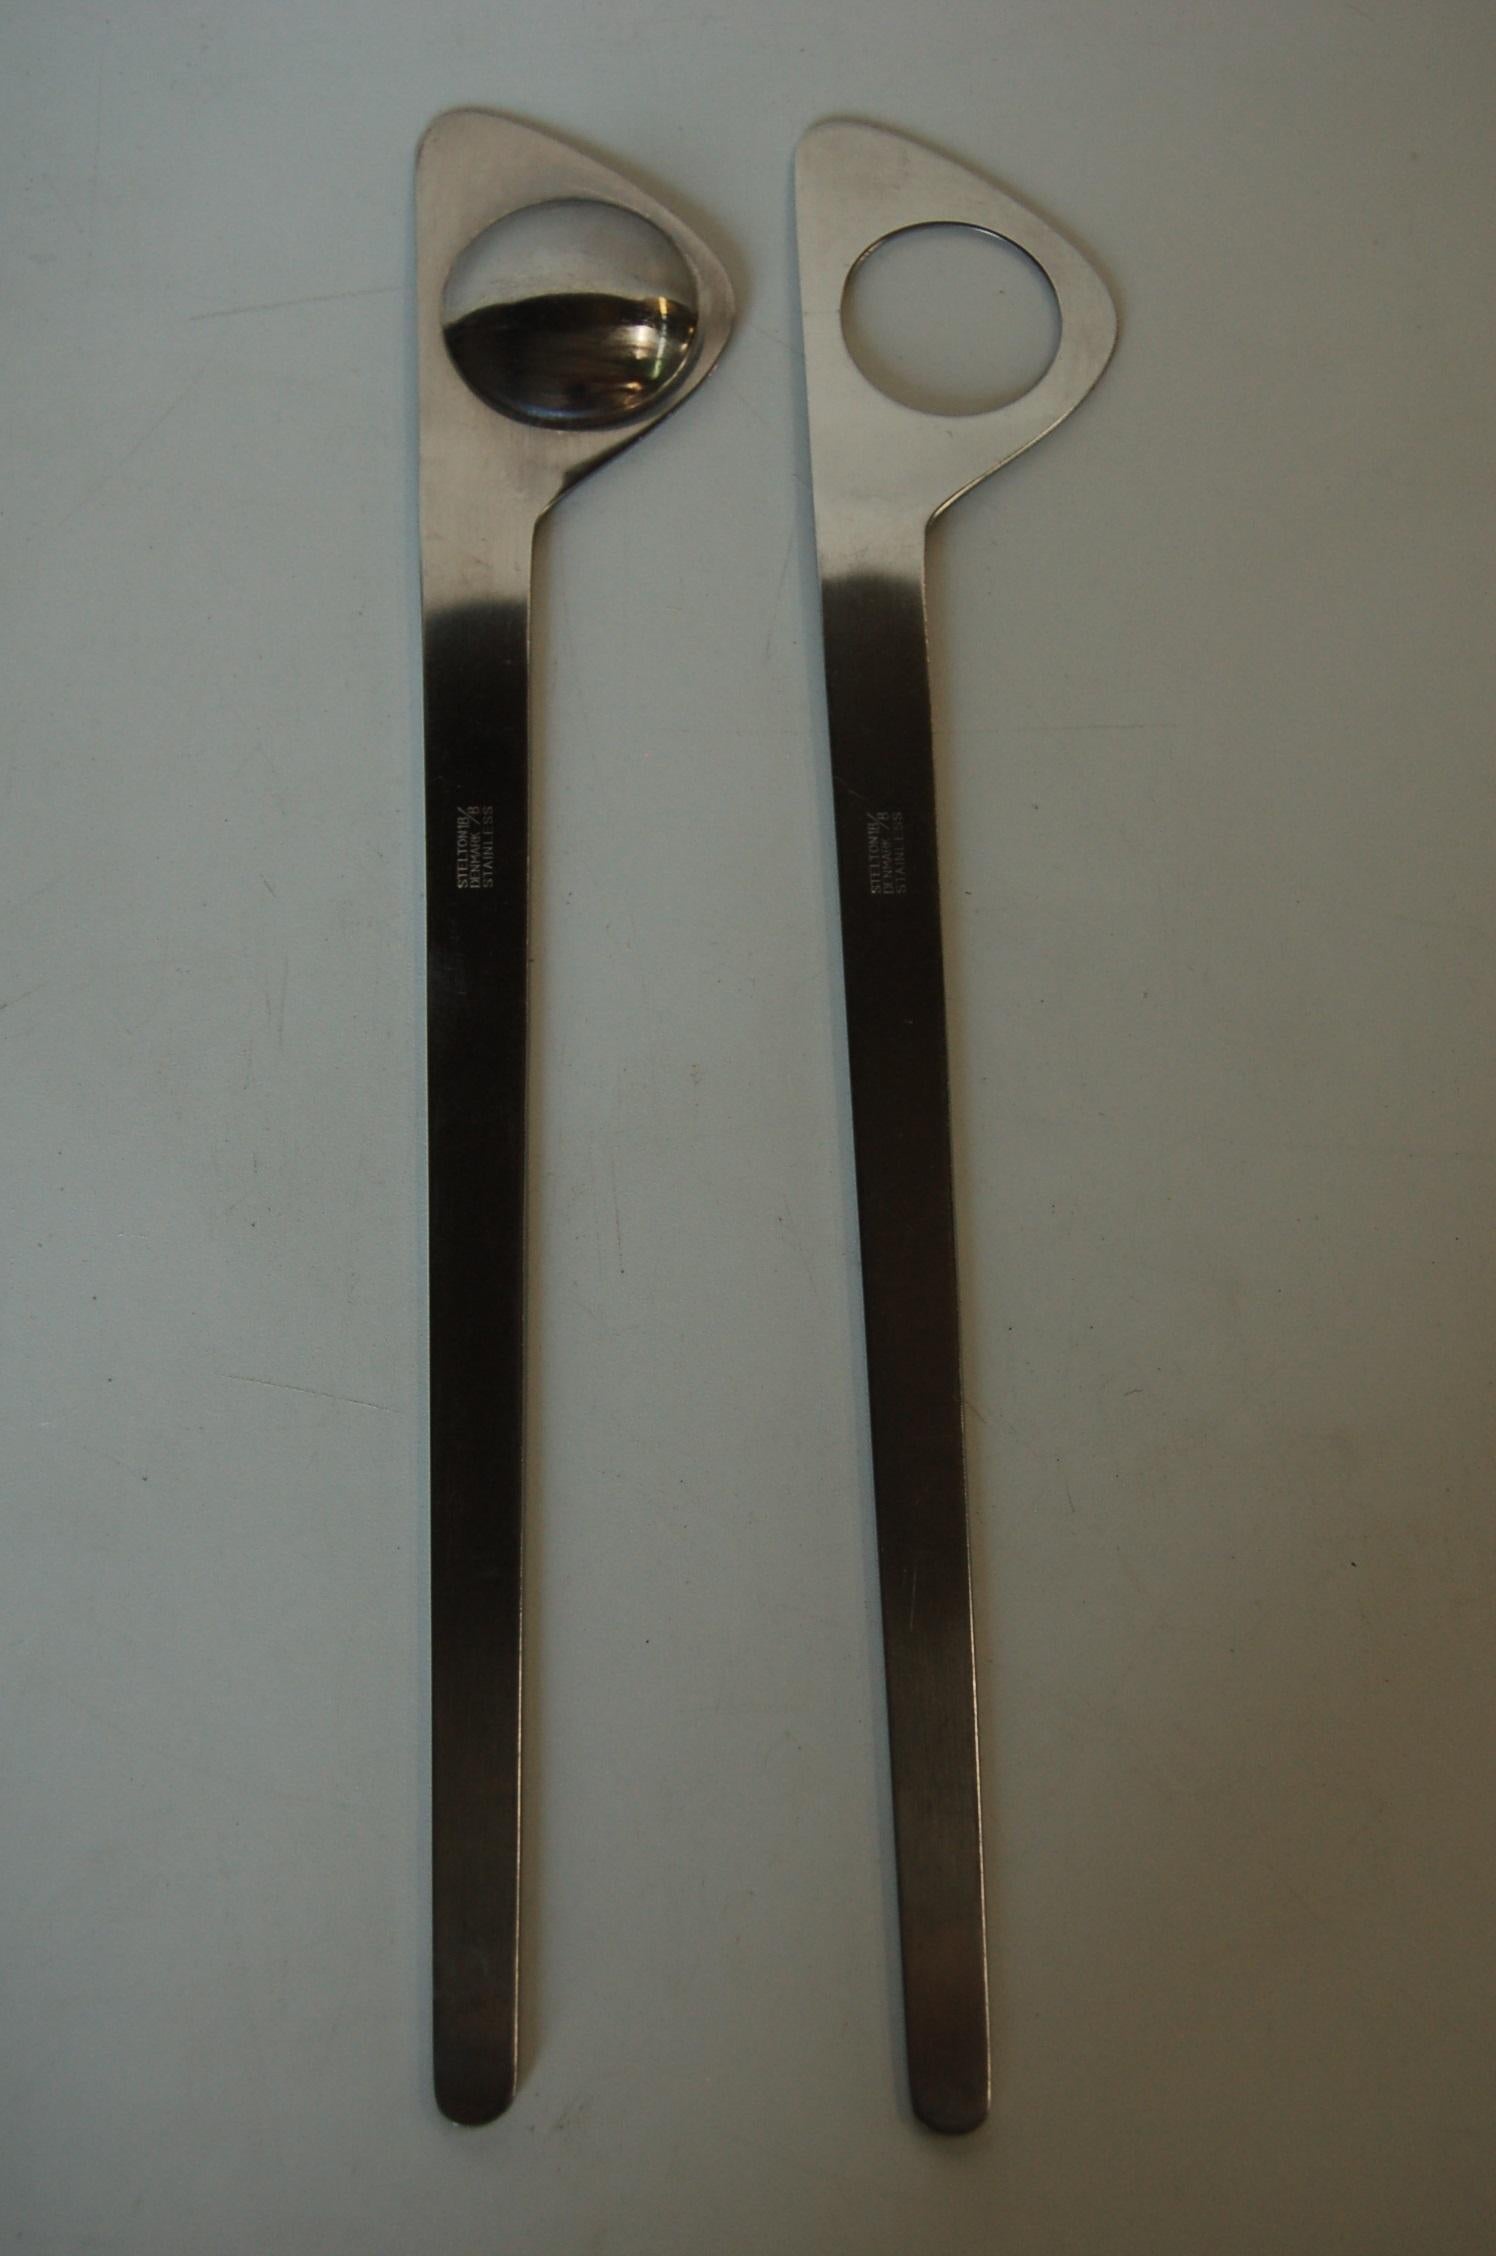 Mid-Century Modern stainless steel salad serving utensils set of two by Stelton.

Measures: 12 long x 3